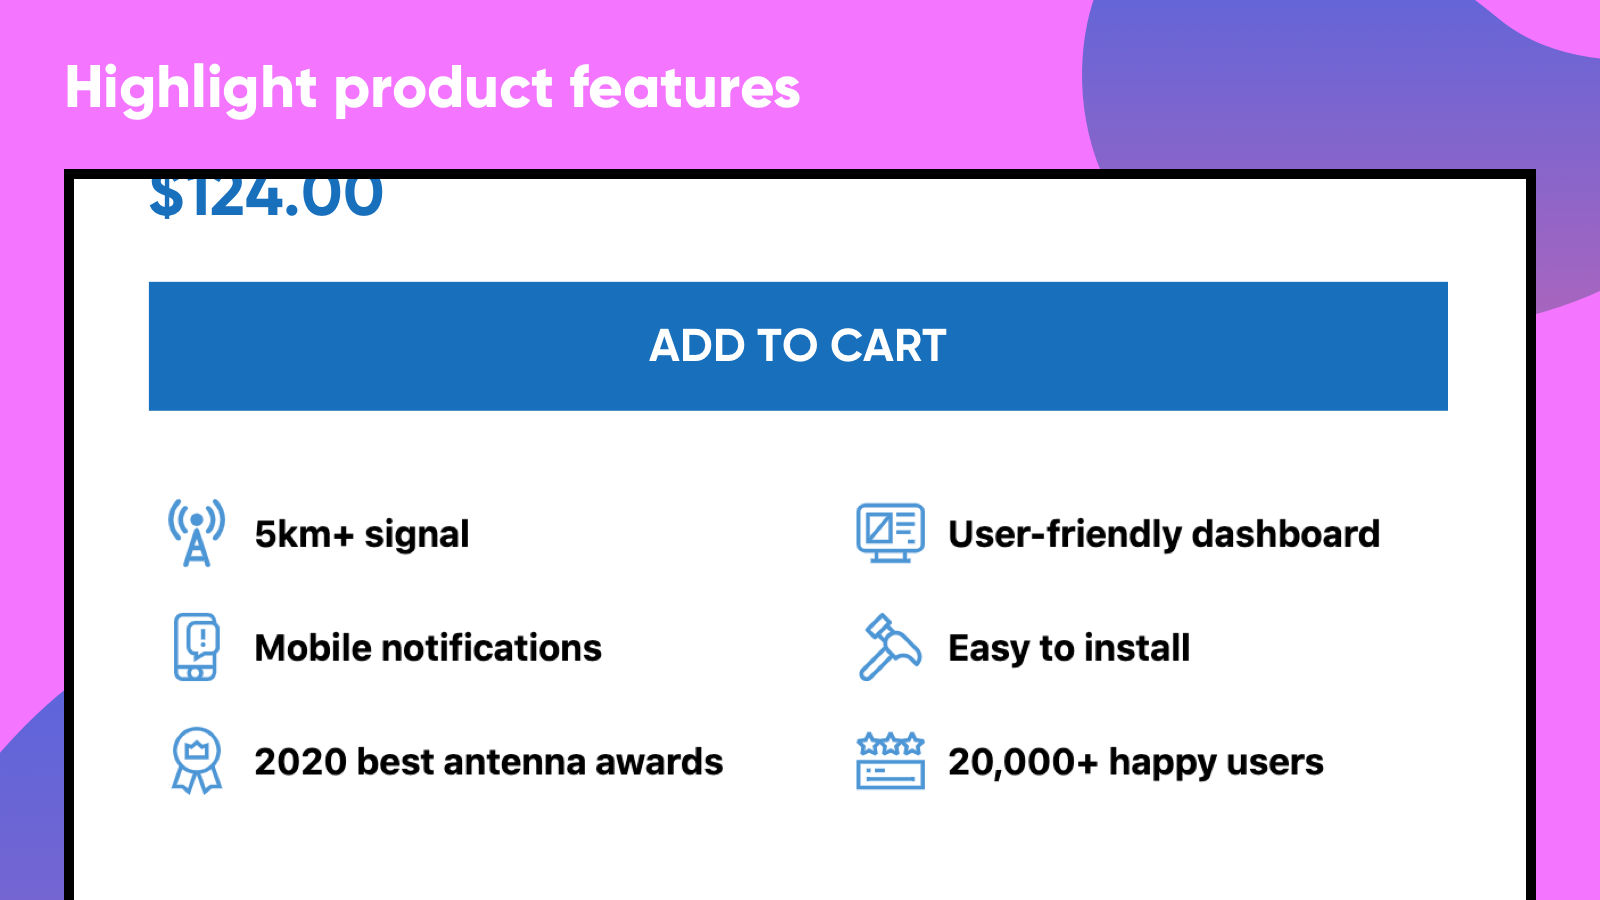 Highlight product features